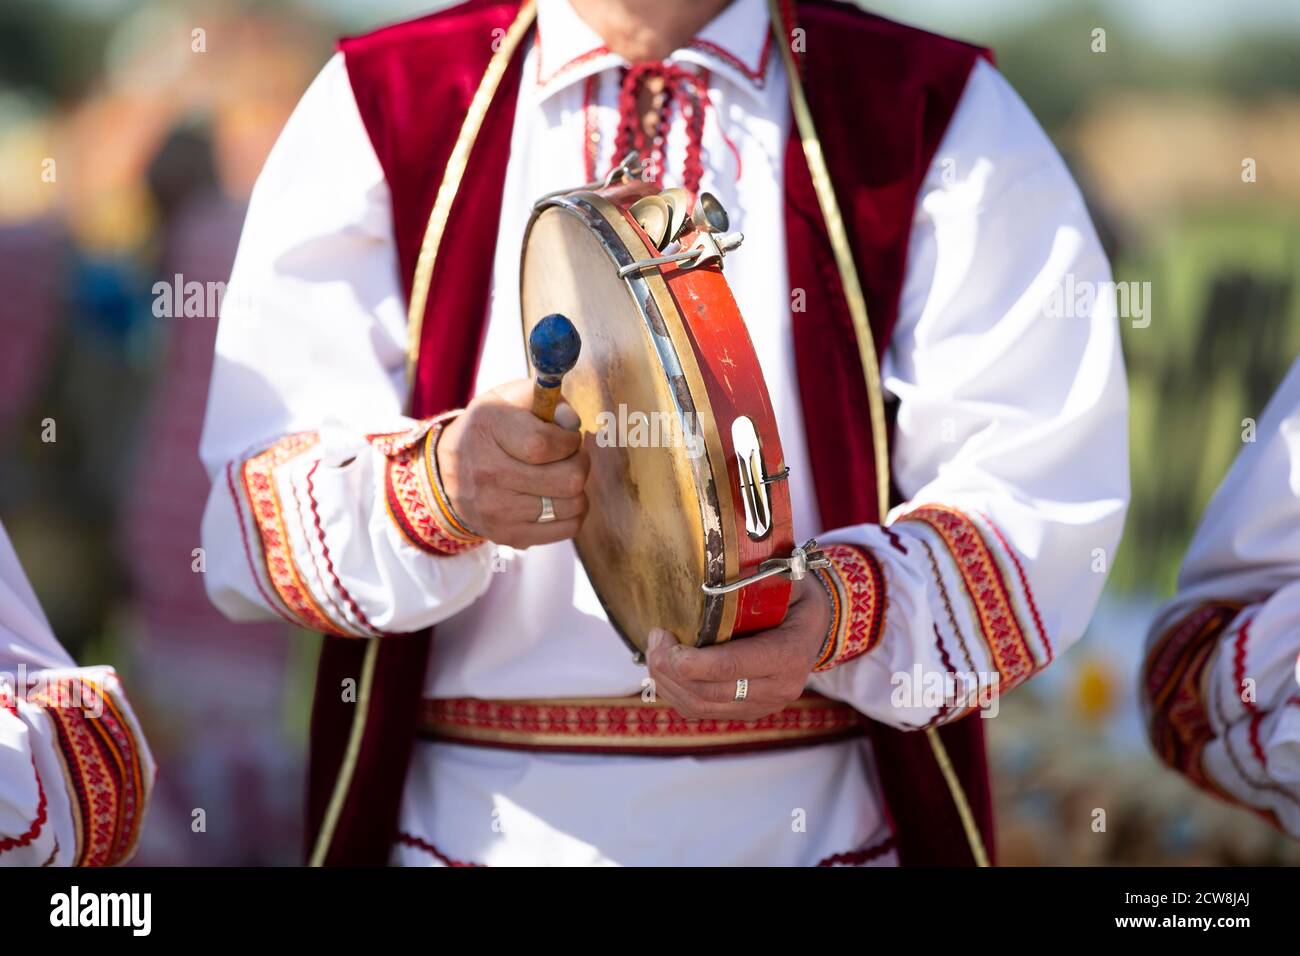 A musician in embroidery plays an ethnic drum. Stock Photo